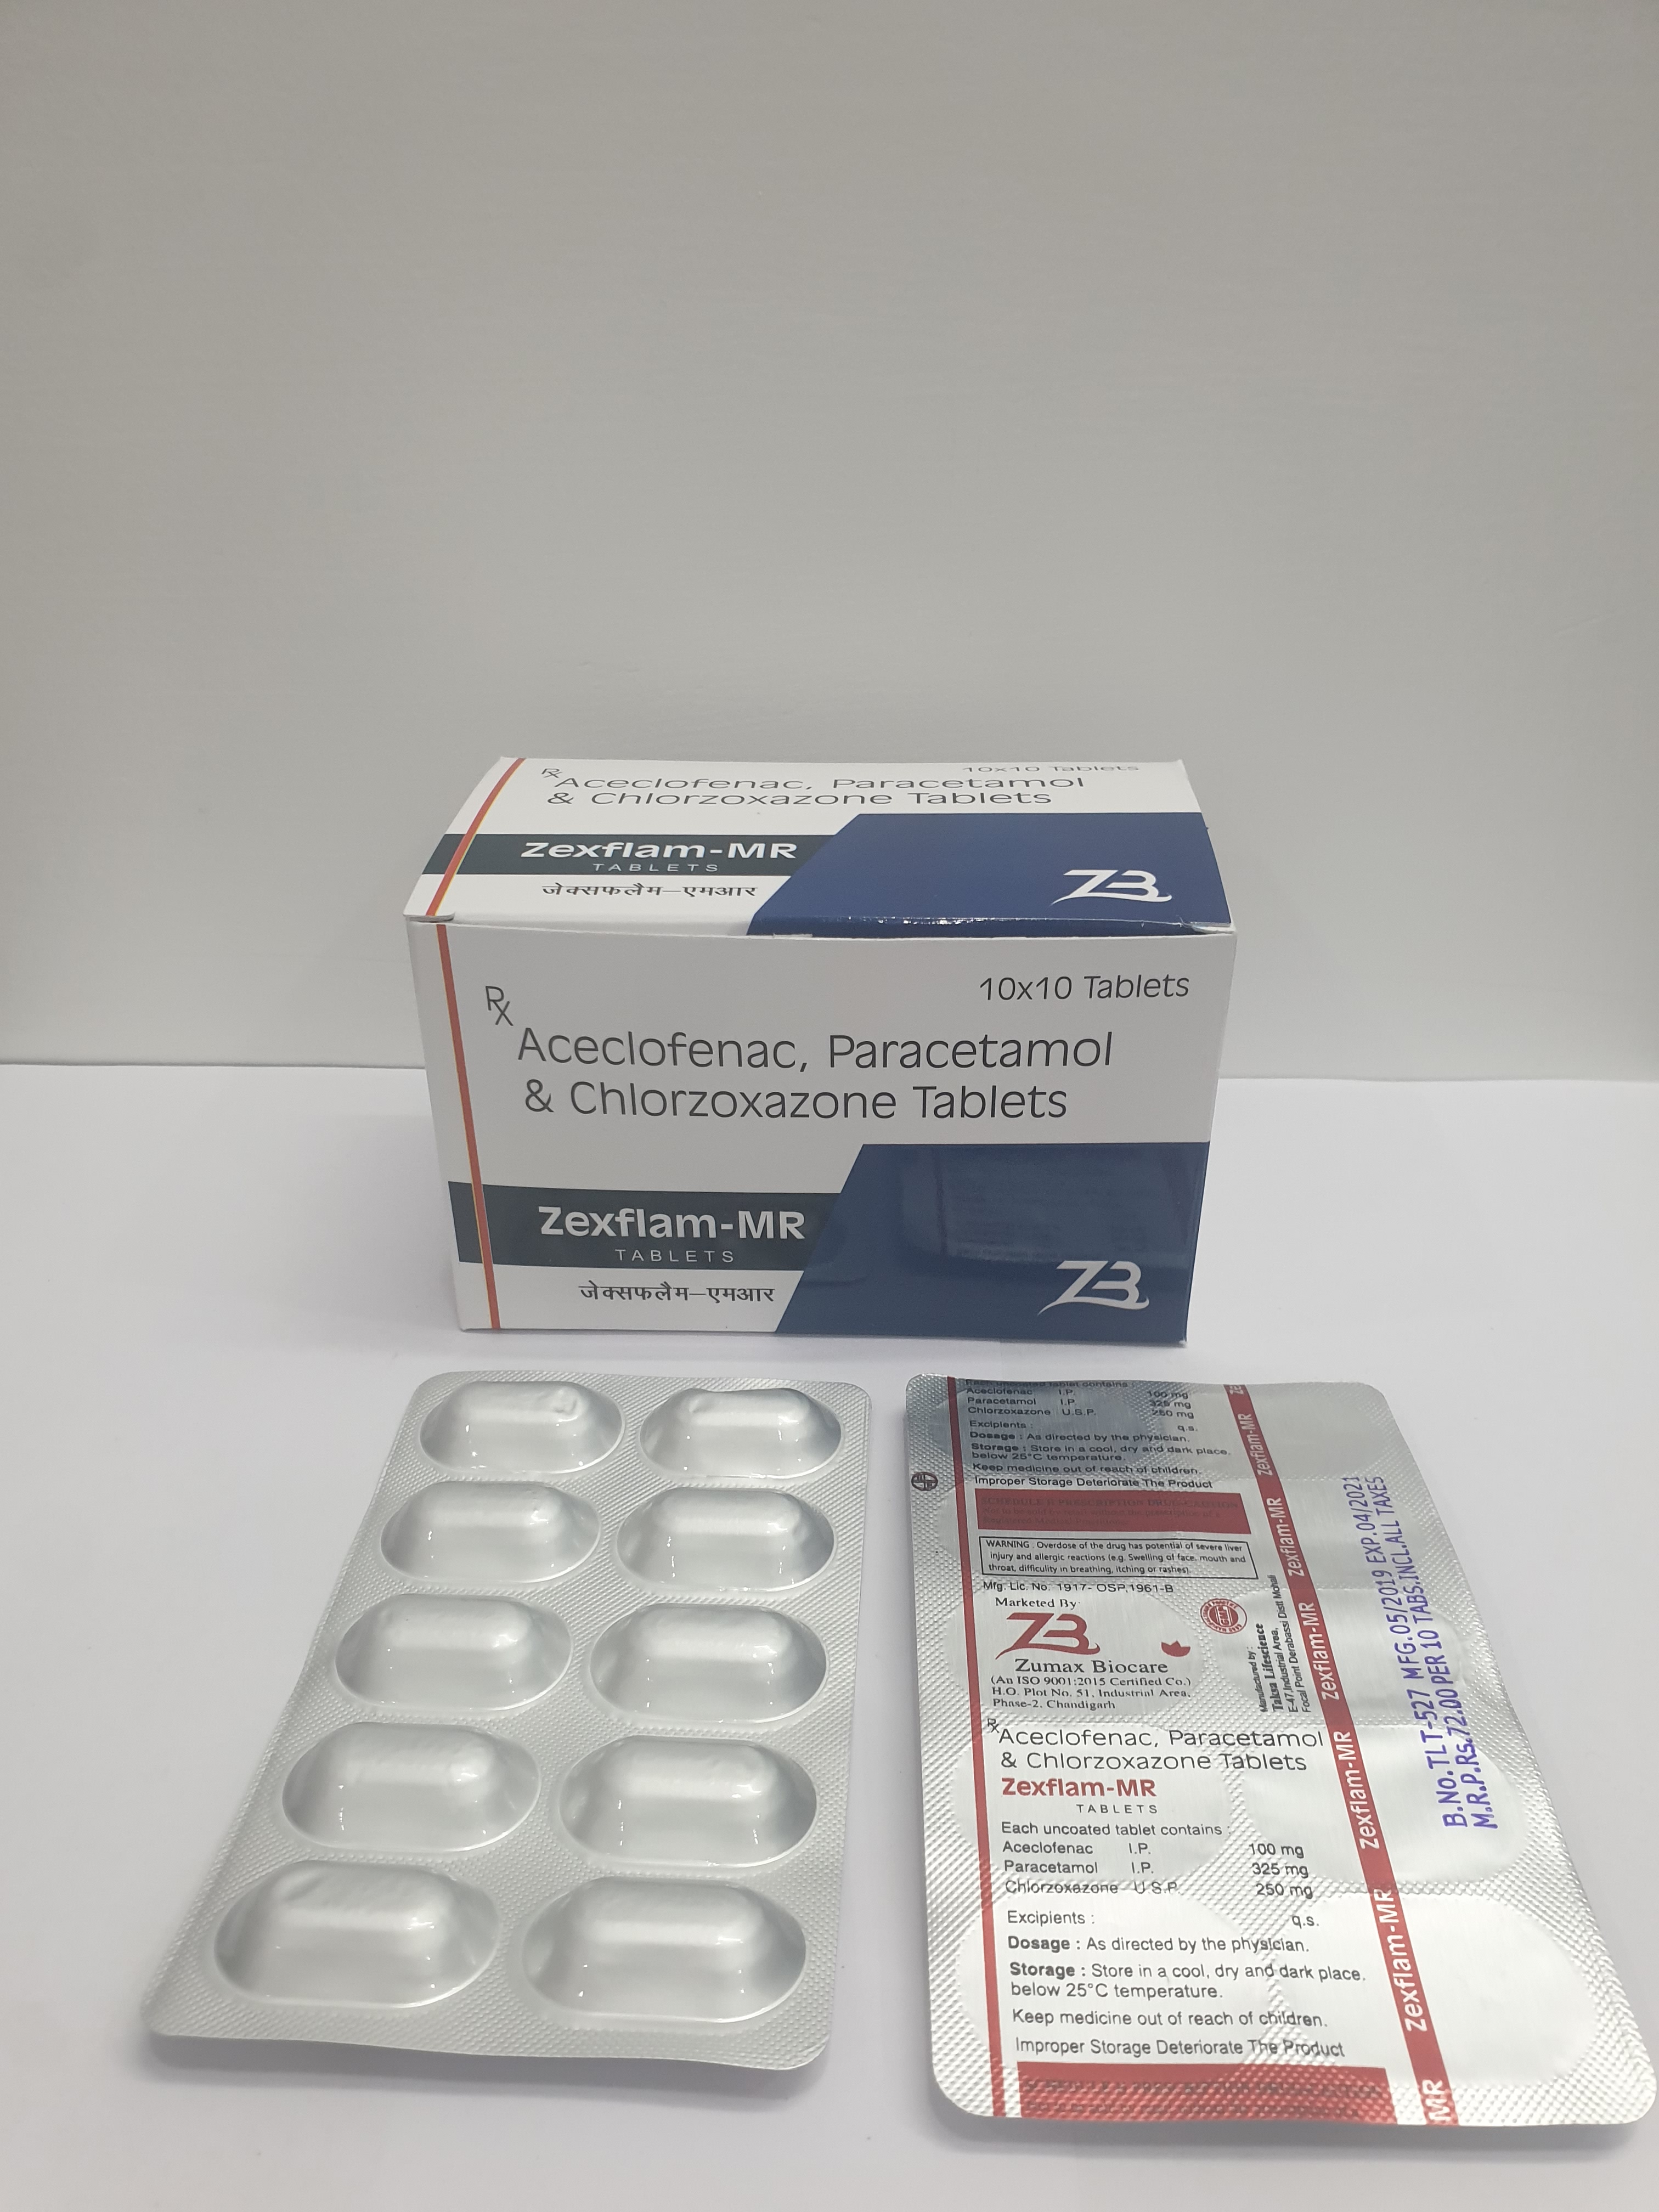 Product Name: Zexflam MR, Compositions of Aceclofenac, Paracetamol & Chlorzoxazone Tablets are Aceclofenac, Paracetamol & Chlorzoxazone Tablets - Zumax Biocare